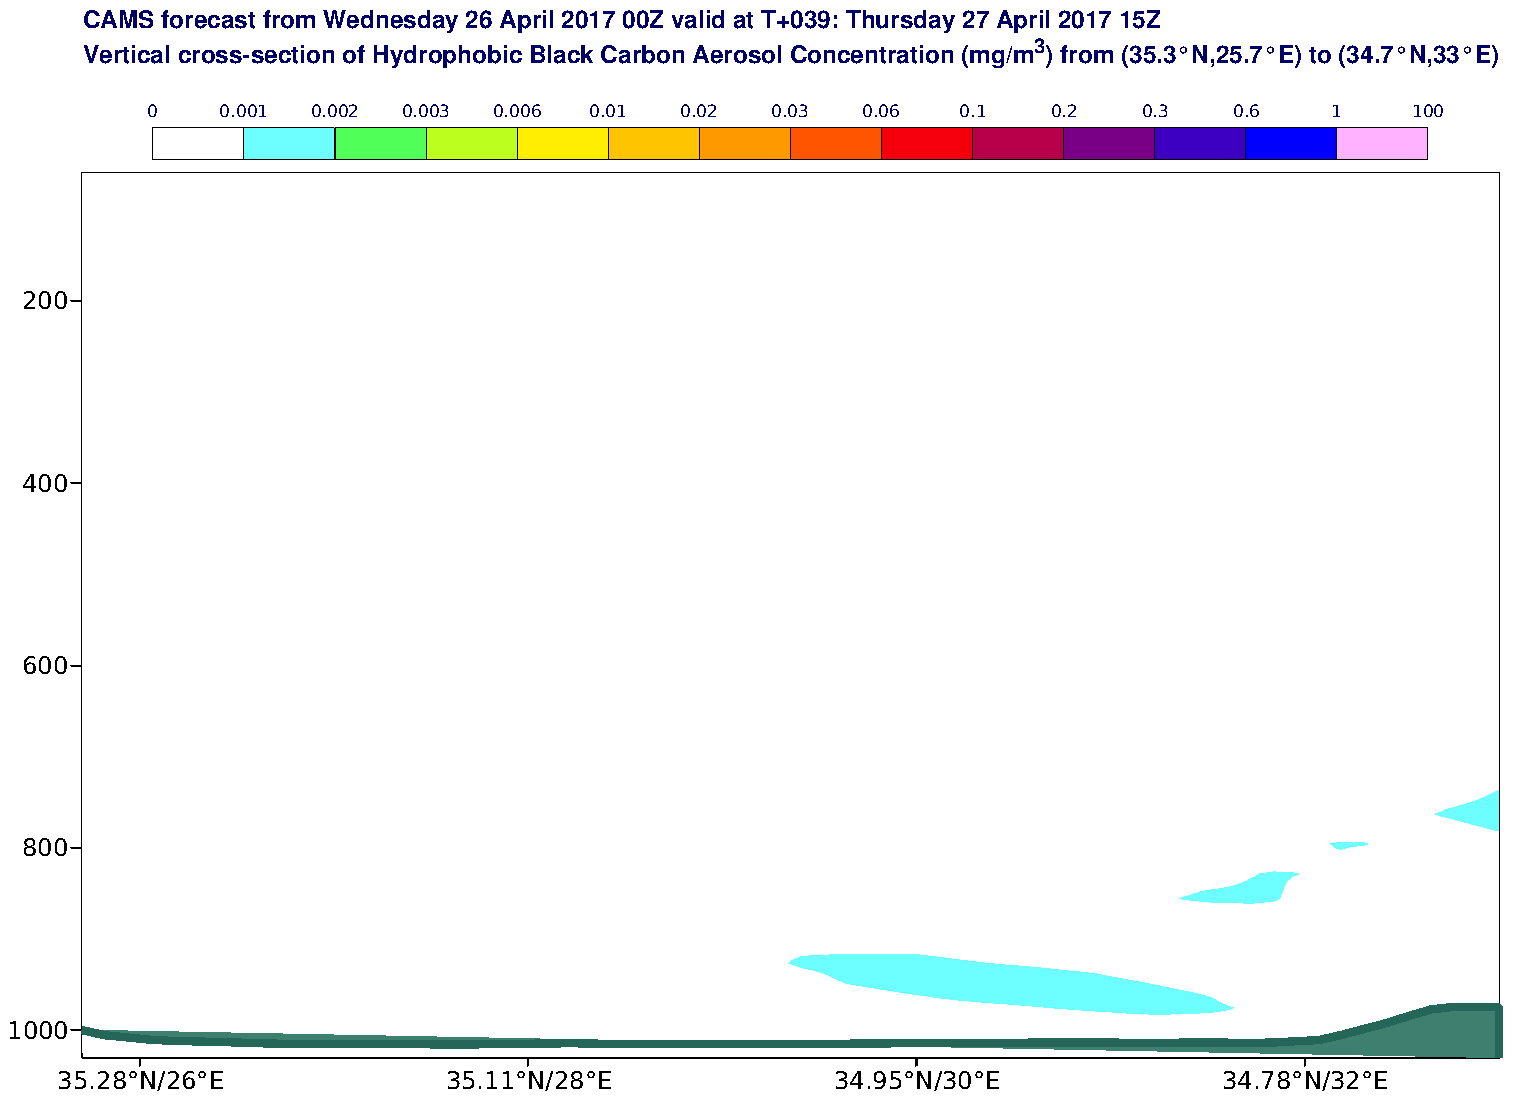 Vertical cross-section of Hydrophobic Black Carbon Aerosol Concentration (mg/m3) valid at T39 - 2017-04-27 15:00